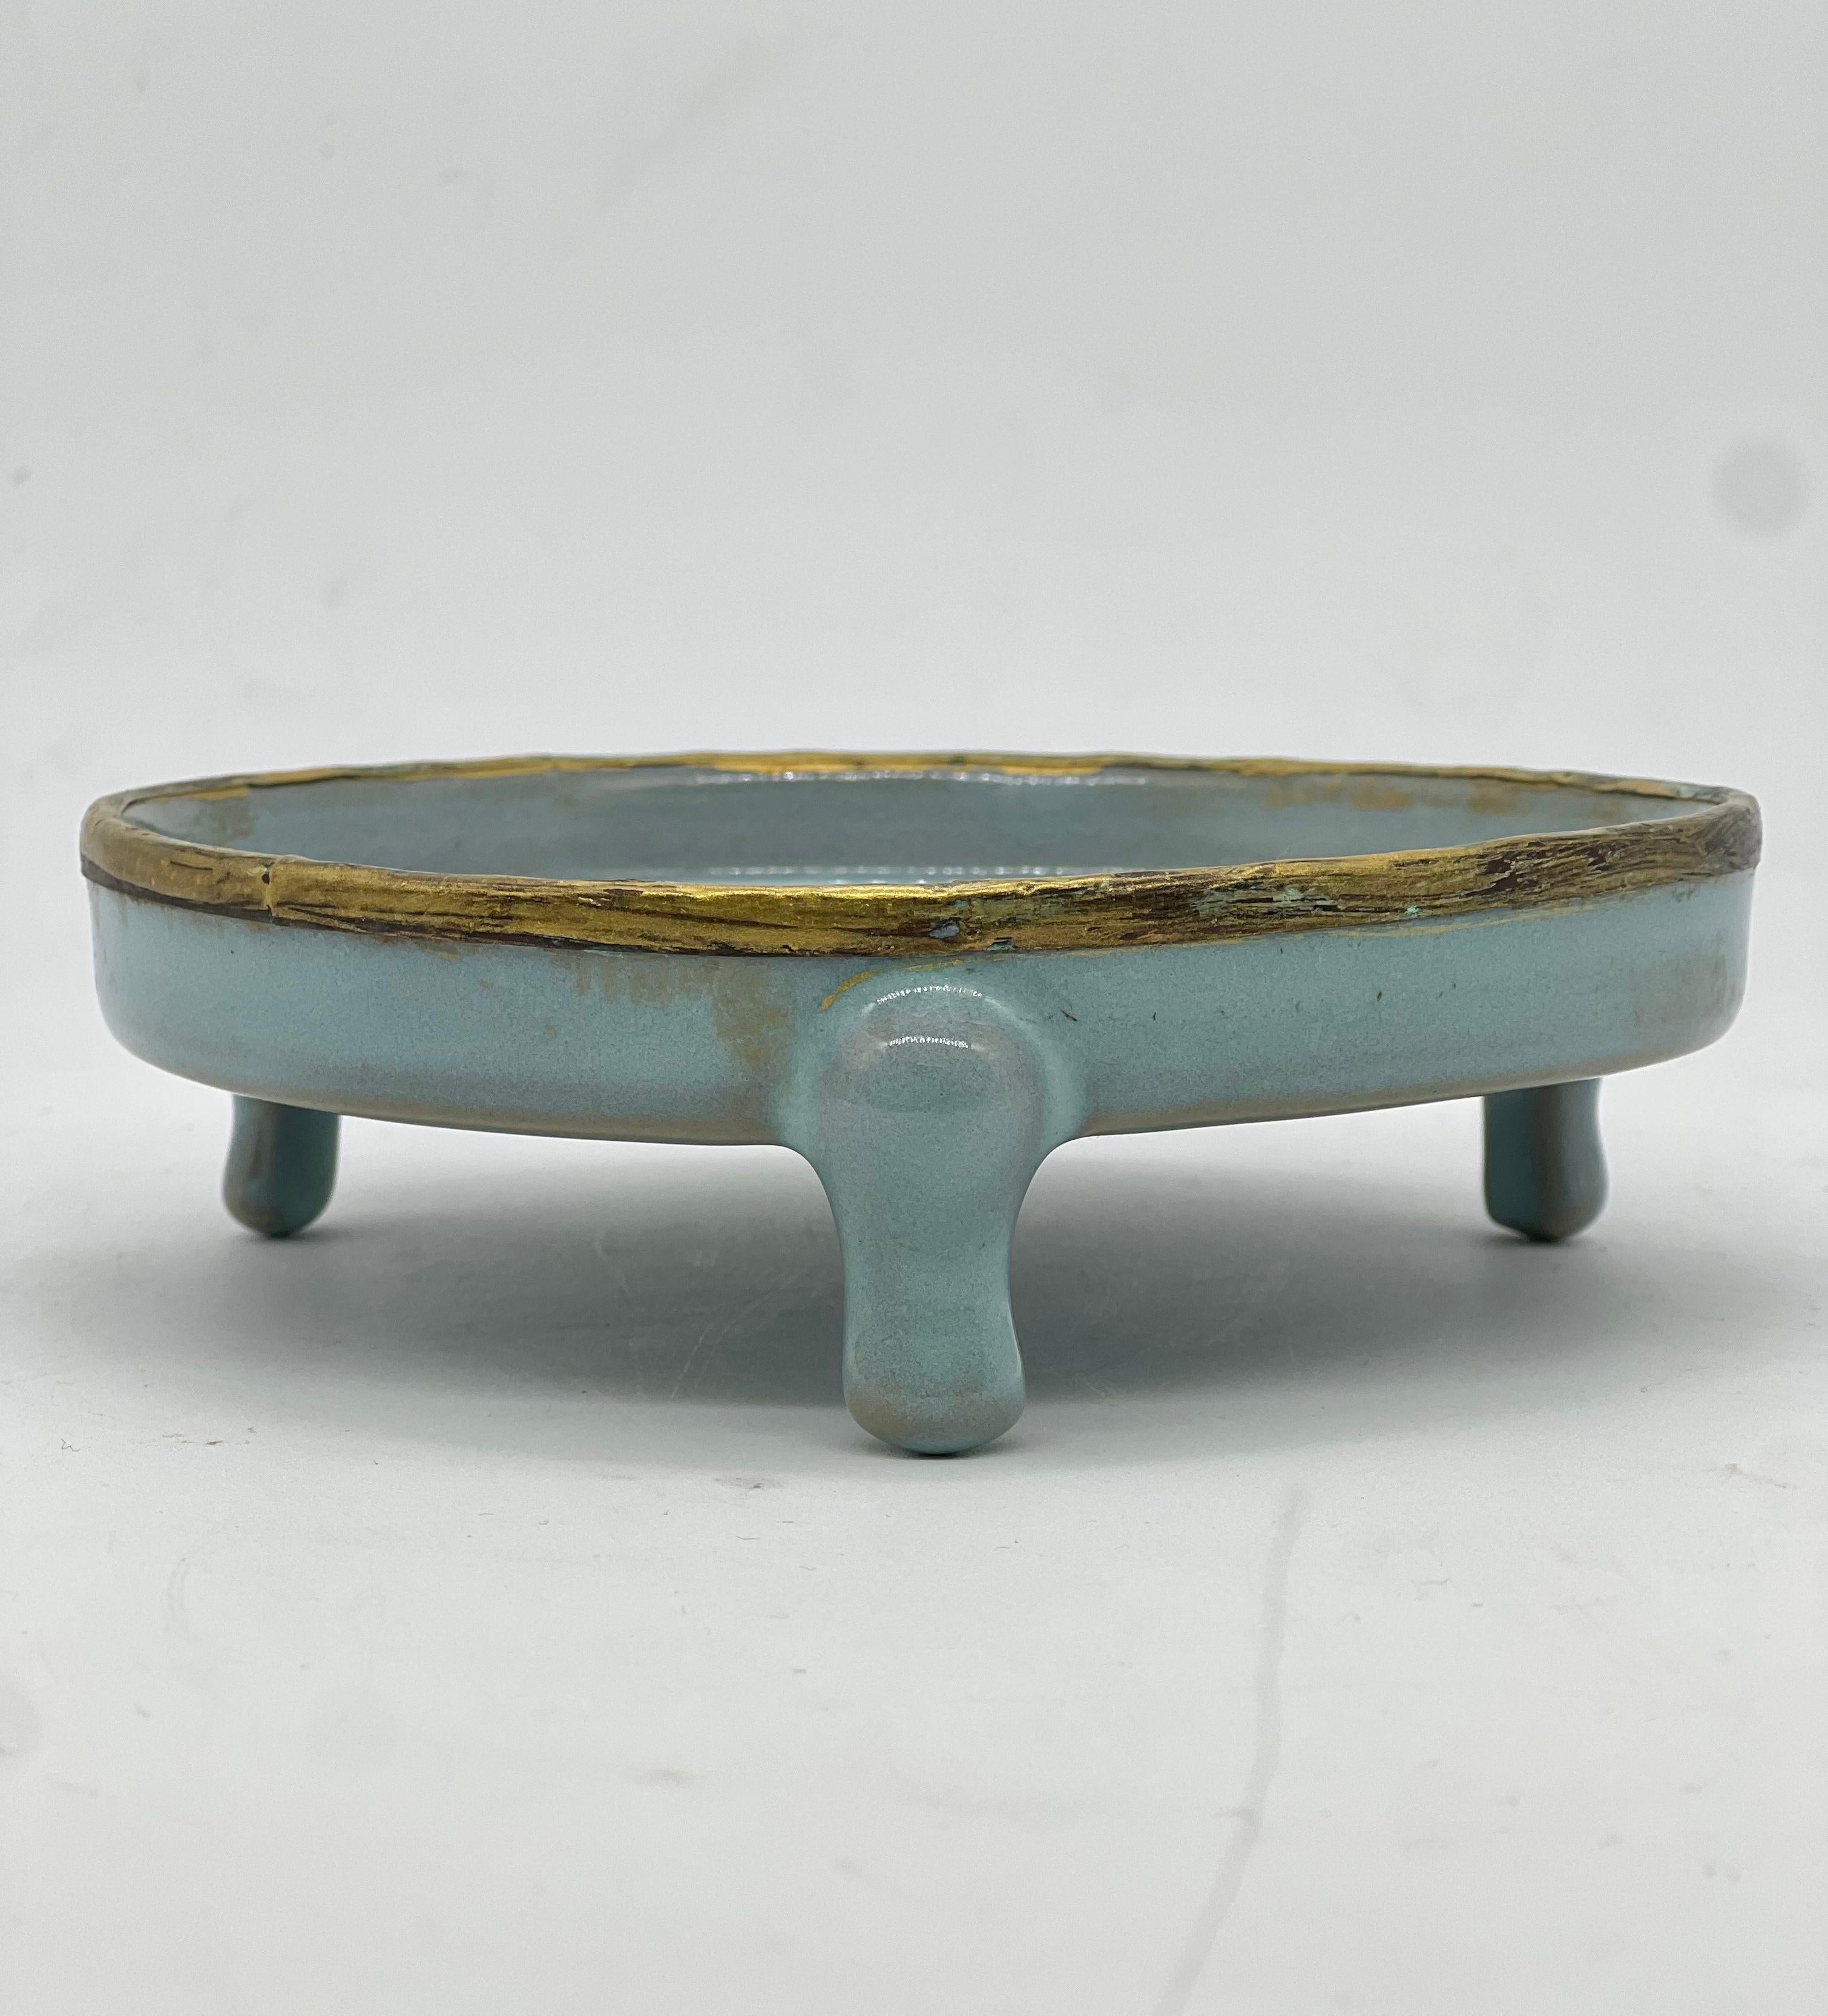 A FINE 19th Century CHINESE THREE LEGGED RU WARE PORCELAIN WASHER/STAND.




A beautiful brush washer/ stand in the Song Dynasty style, the washer or censer with plate of circular form and with a pale blue glaze that continues over the feet and